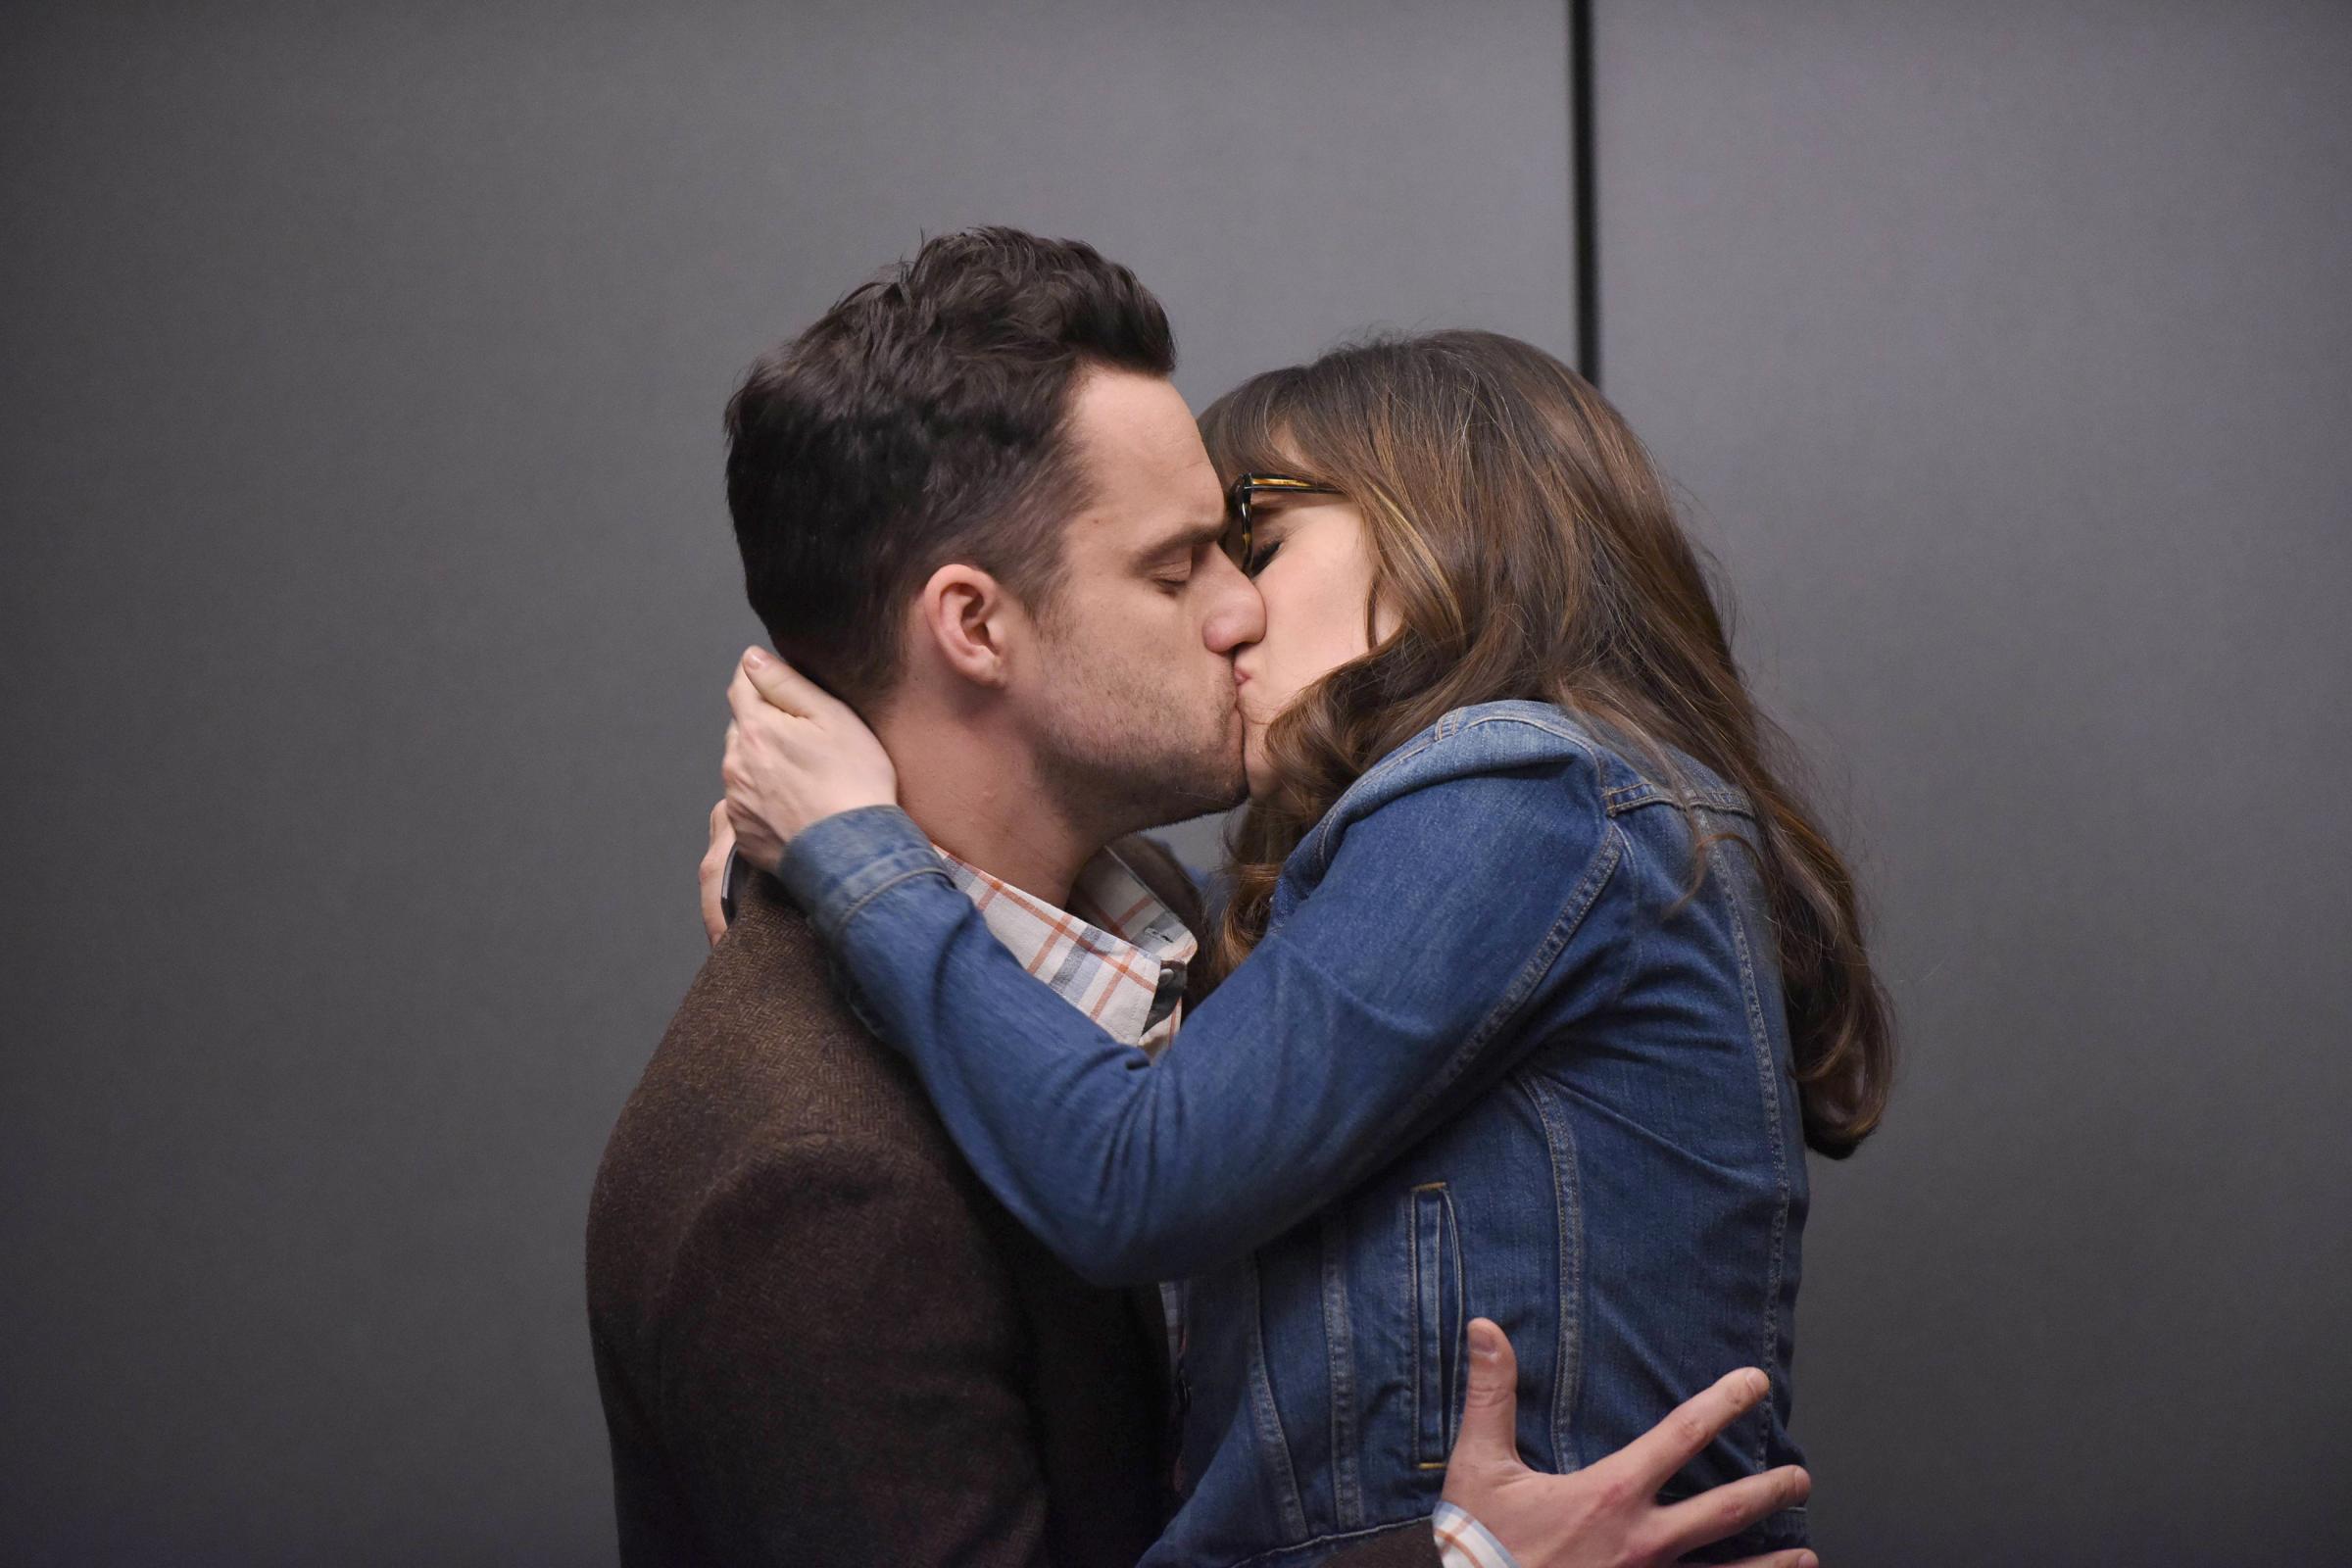 NEW GIRL: L-R: Jake Johnson and Zooey Deschanel in the "Five Stars for Beezus" season finale episode of NEW GIRL airing Tuesday, April 4 (8:00-8:31 PM ET/PT) on FOX. ©2017 Fox Broadcasting Co. Cr: Ray Mickshaw/FOX